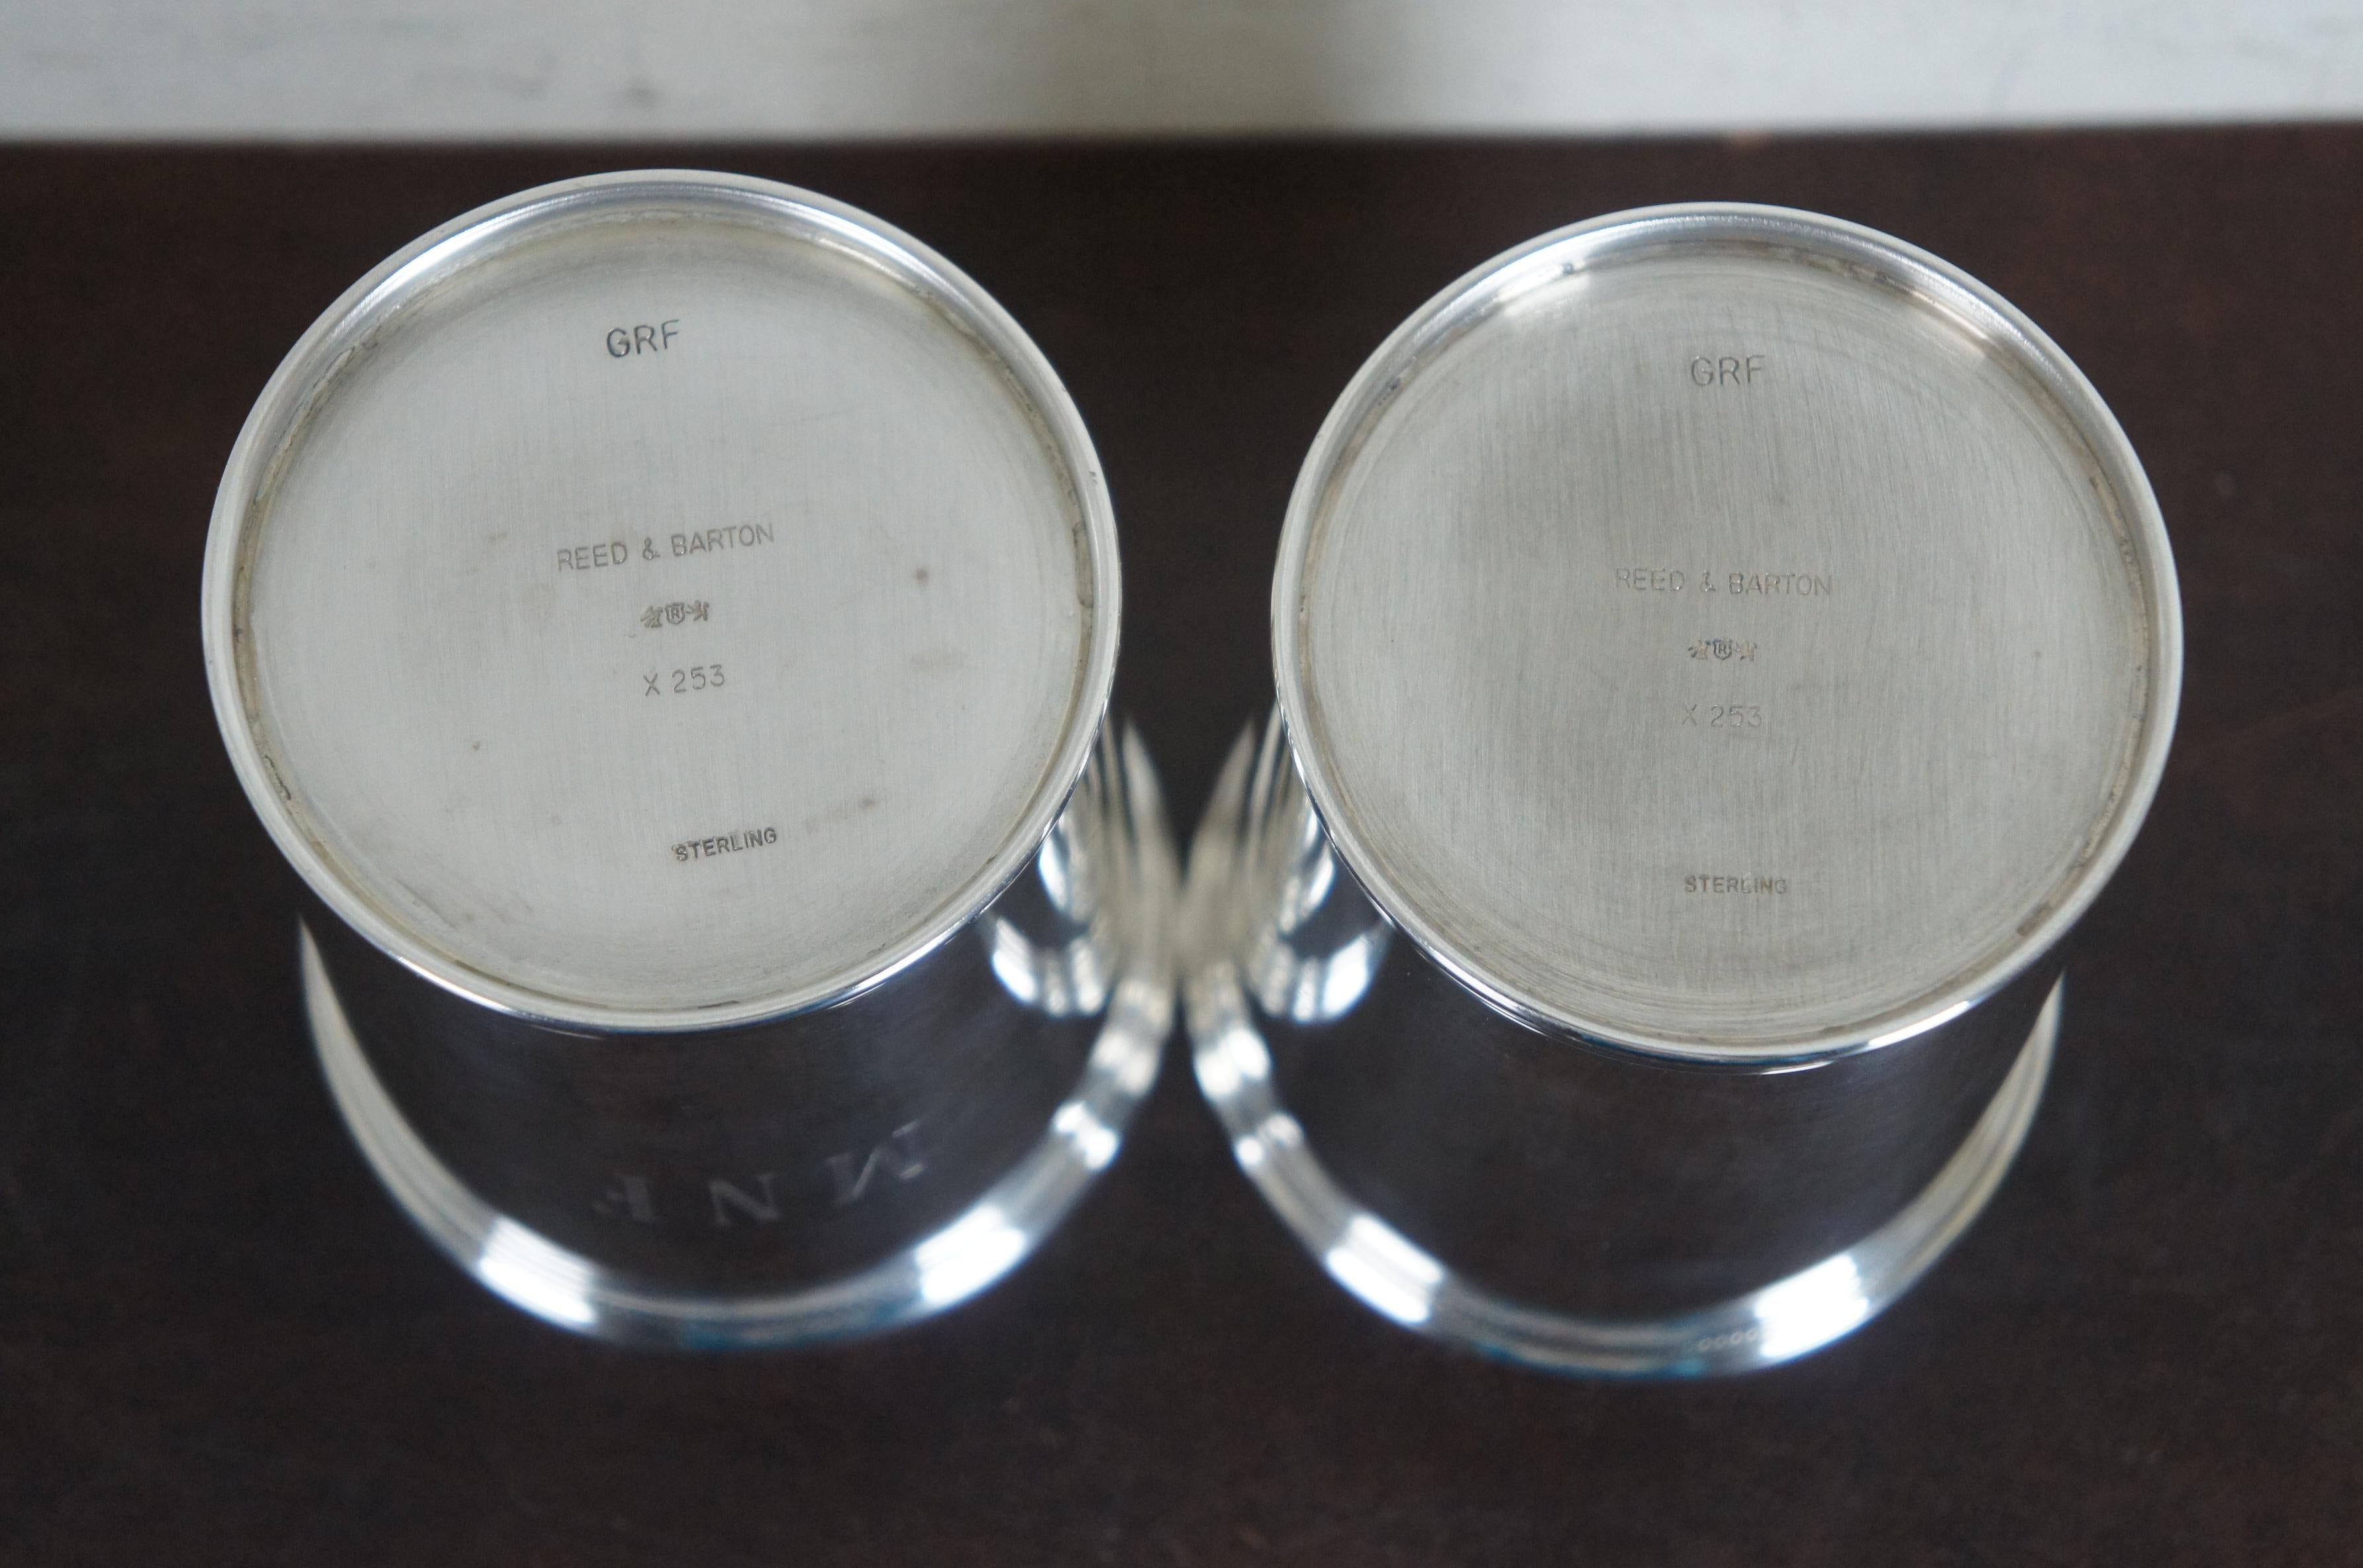 2 Sterling Silver Reed & Barton Gerald Ford Presidential Mint Julep Cup GRF x253 3